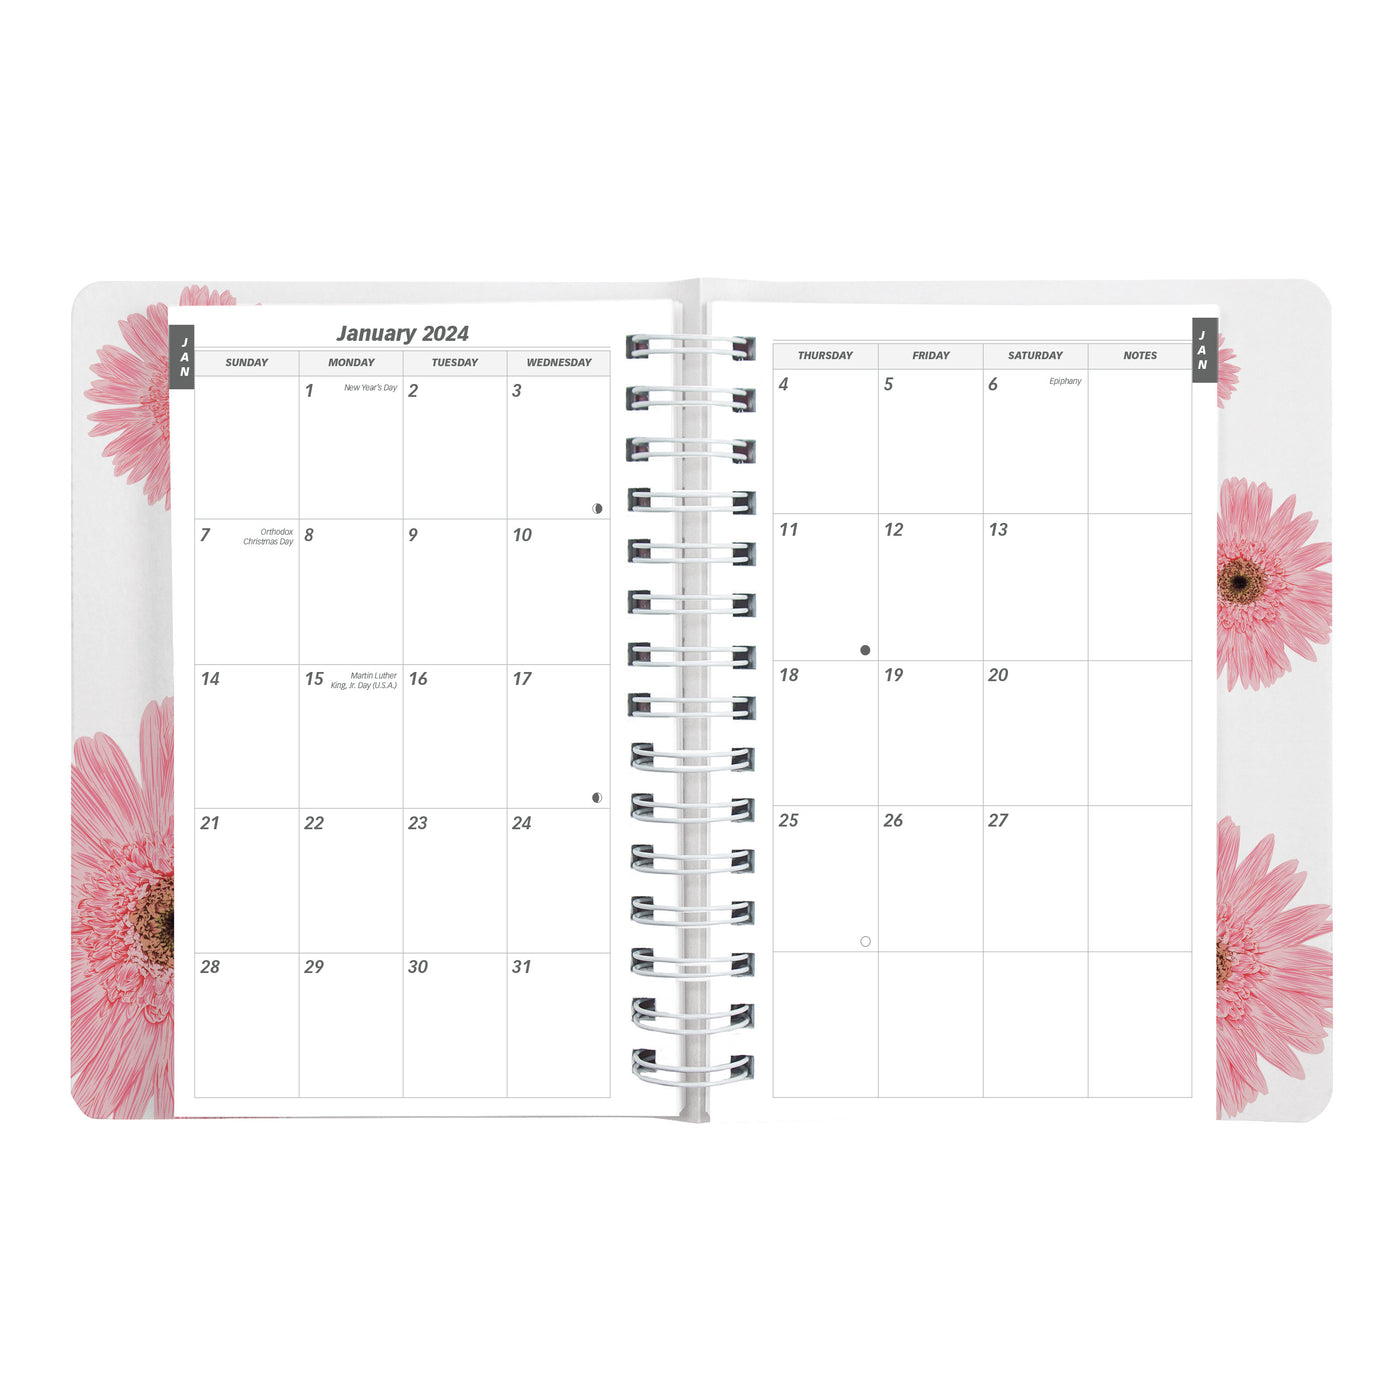 Brownline Daily Planner - 5" x 8" - Pink Daisy Cover